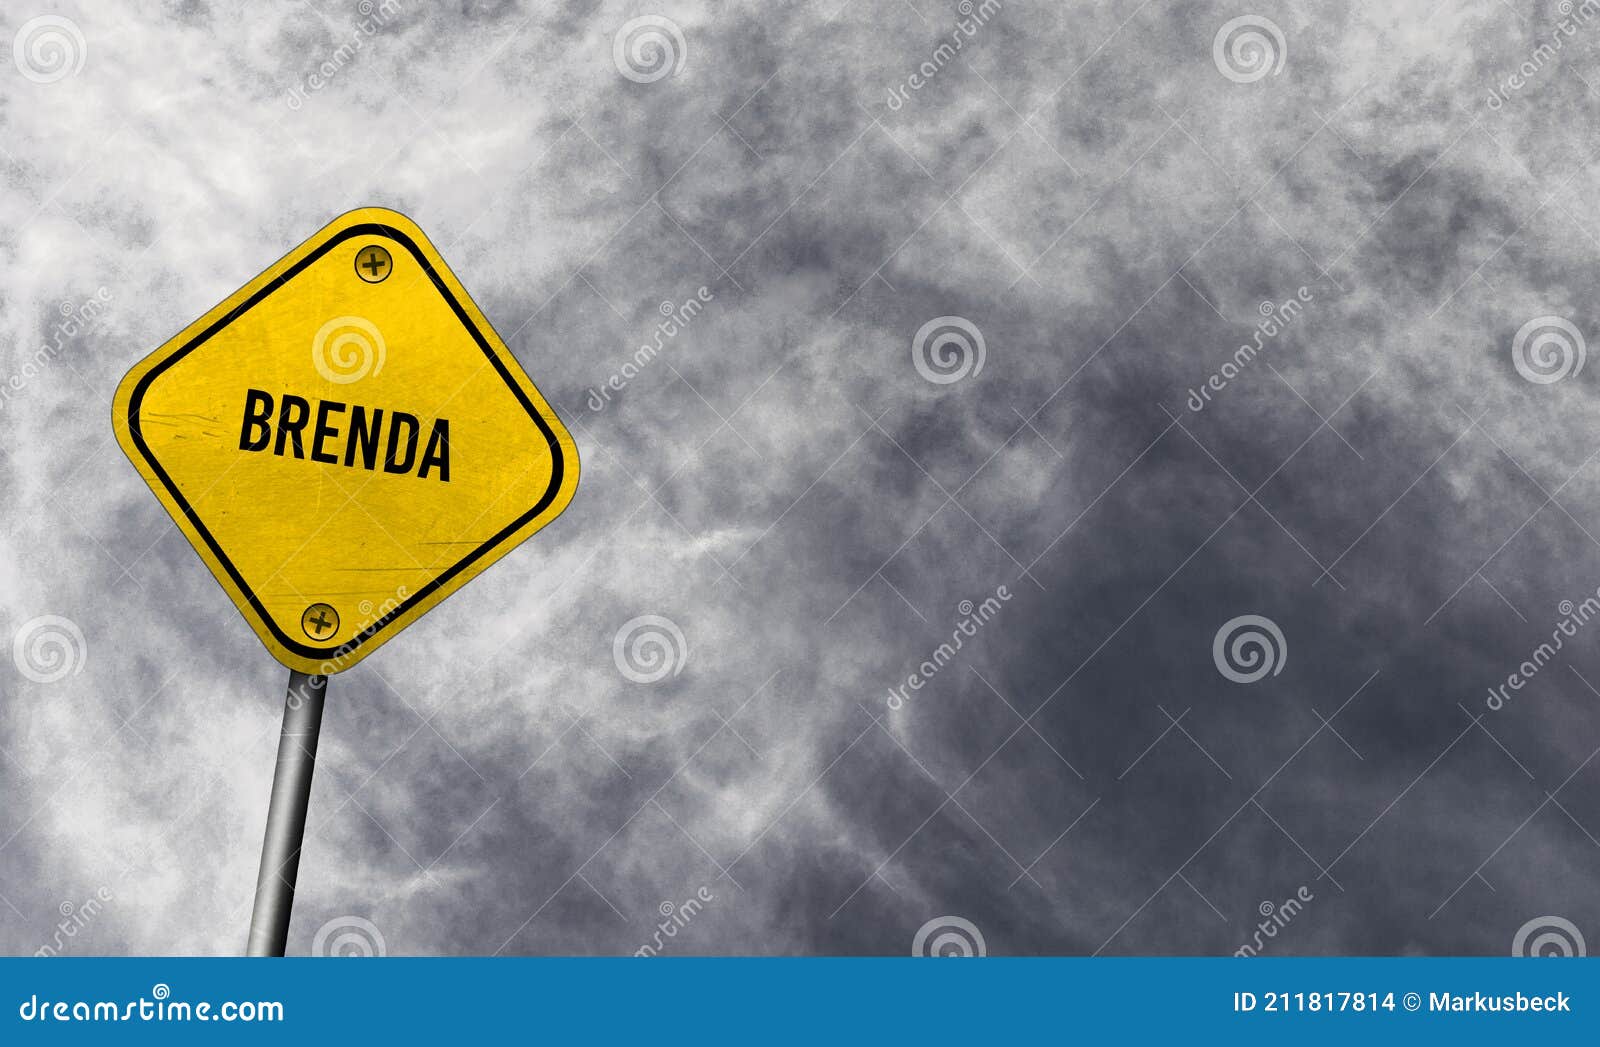 brenda - yellow sign with cloudy background